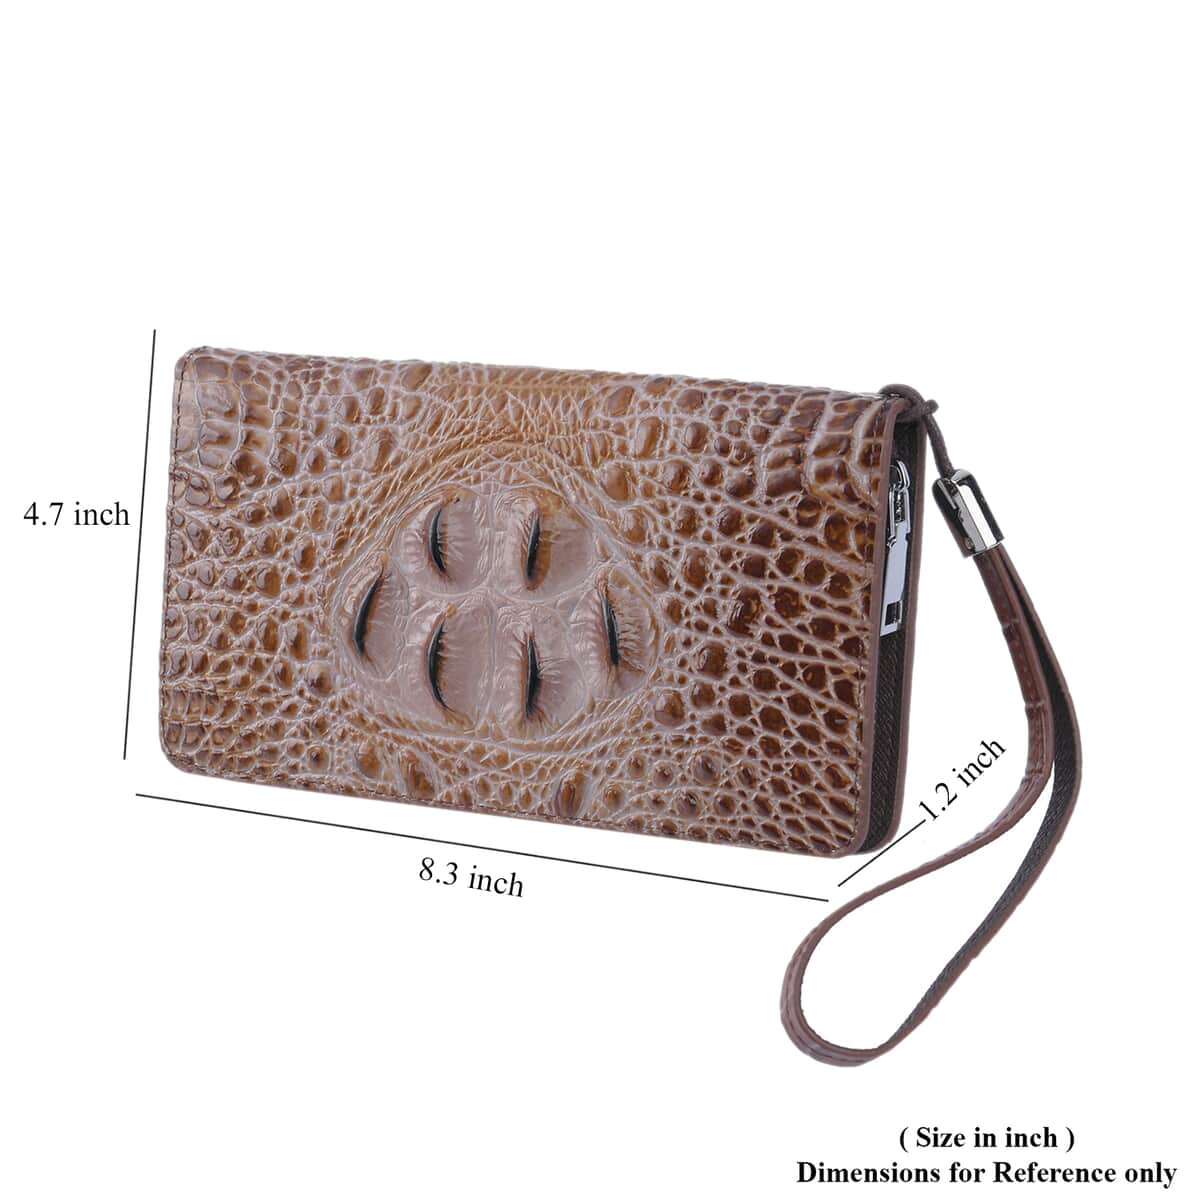 Black Croc Embossed Genuine Leather Wallet (8.3"x1.2"x4.7") with Single Zipped and Handle Drop image number 5